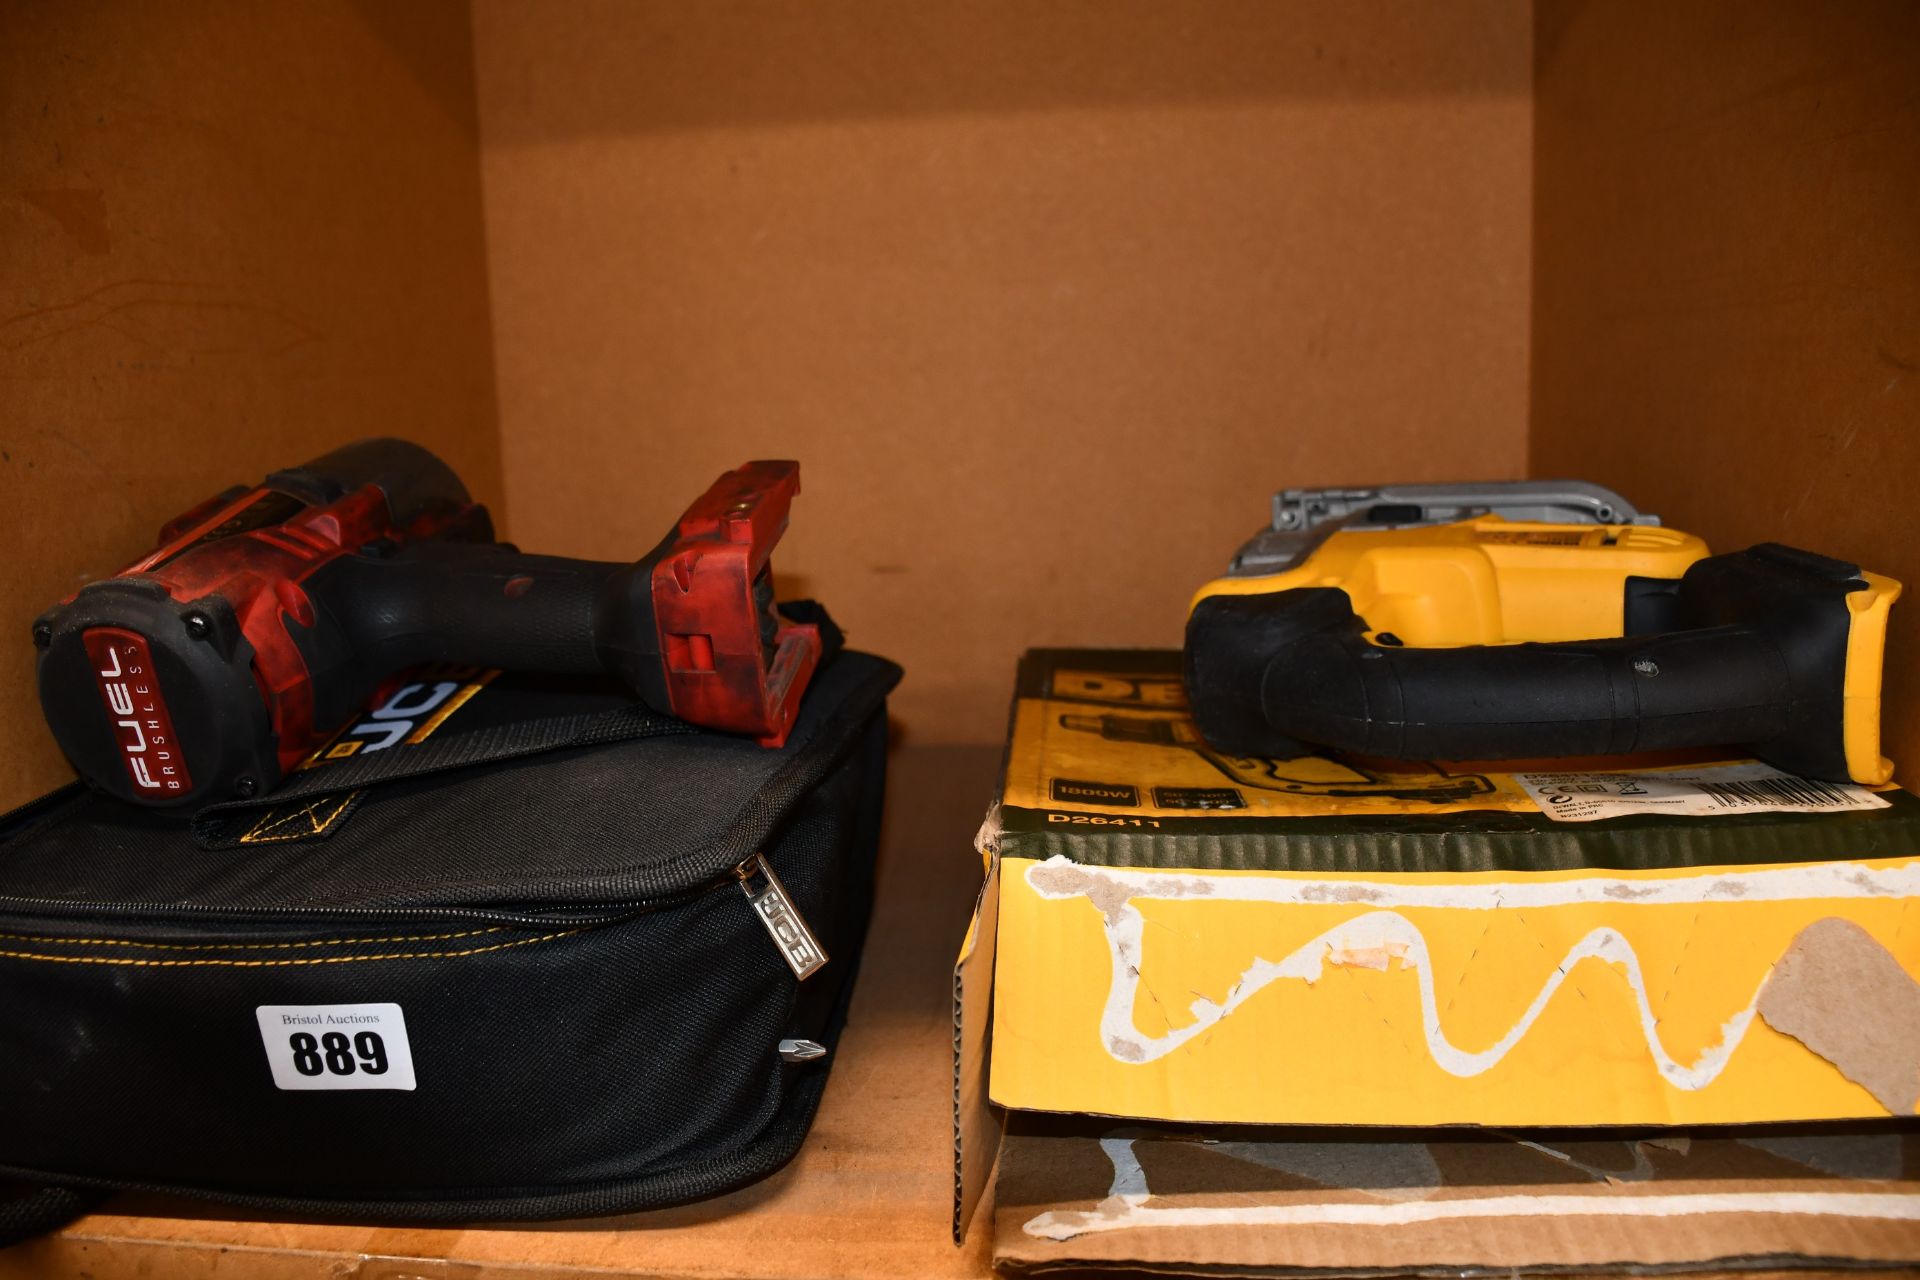 A quantity of new and used powertools to include Dewalt, Milwaukee and JCB.